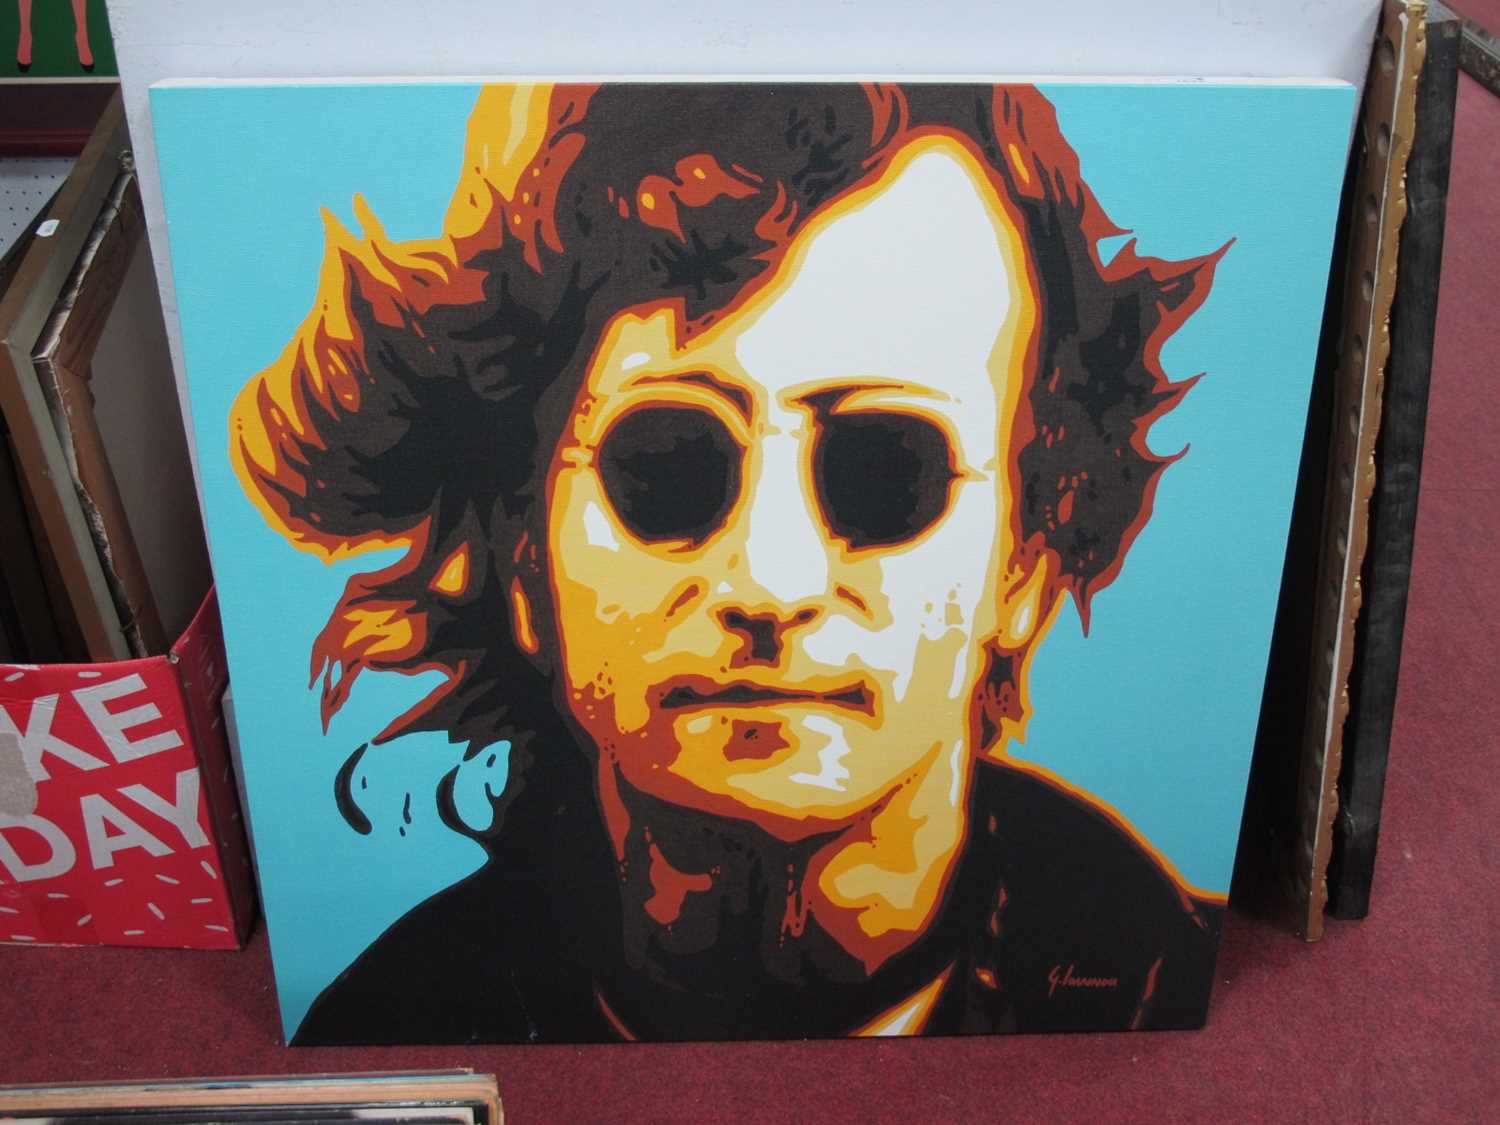 After George Ioanou, 'Increase the Peace' John Lennon', giclee print on canvas, dated 2004 signed